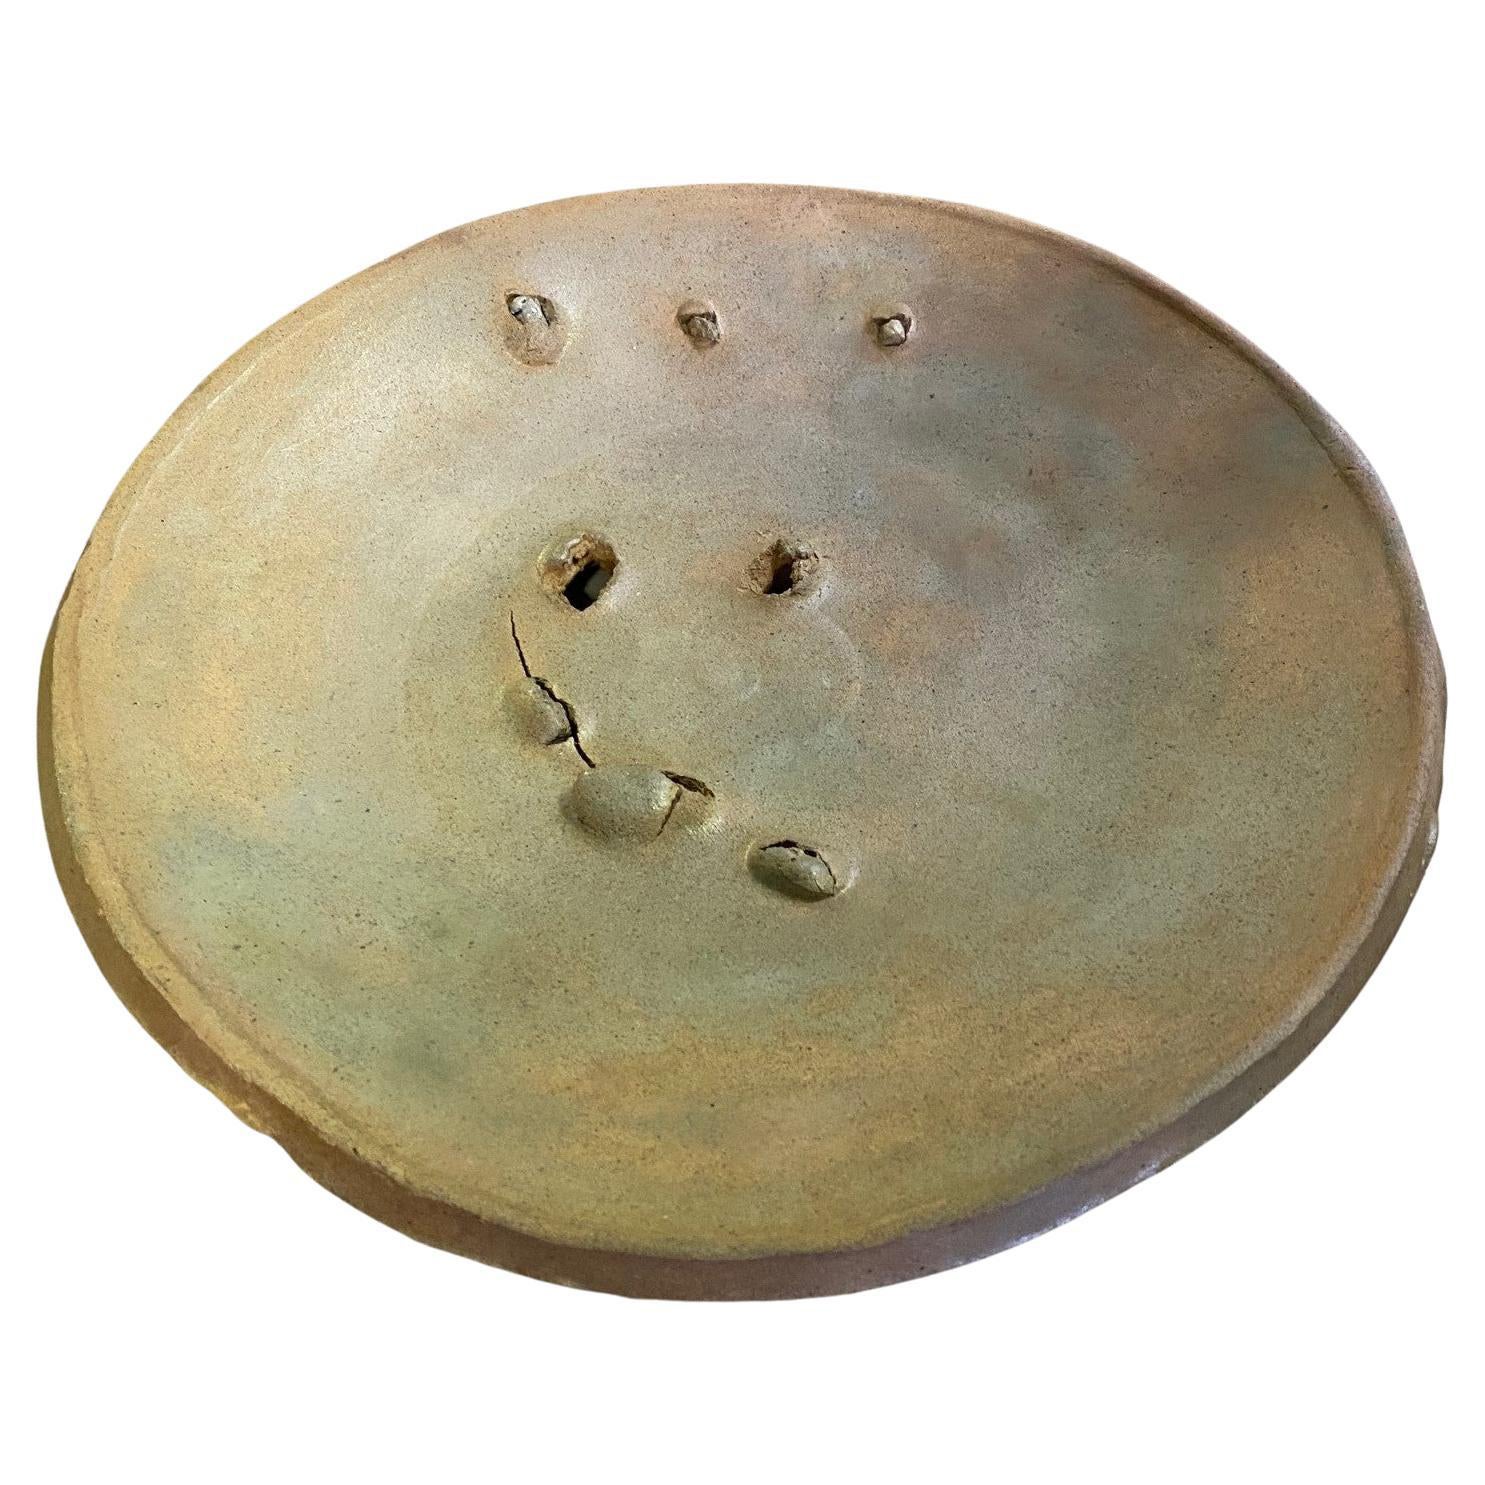 Peter Voulkos Signed Large California Studio Pottery Stoneware Charger Plate